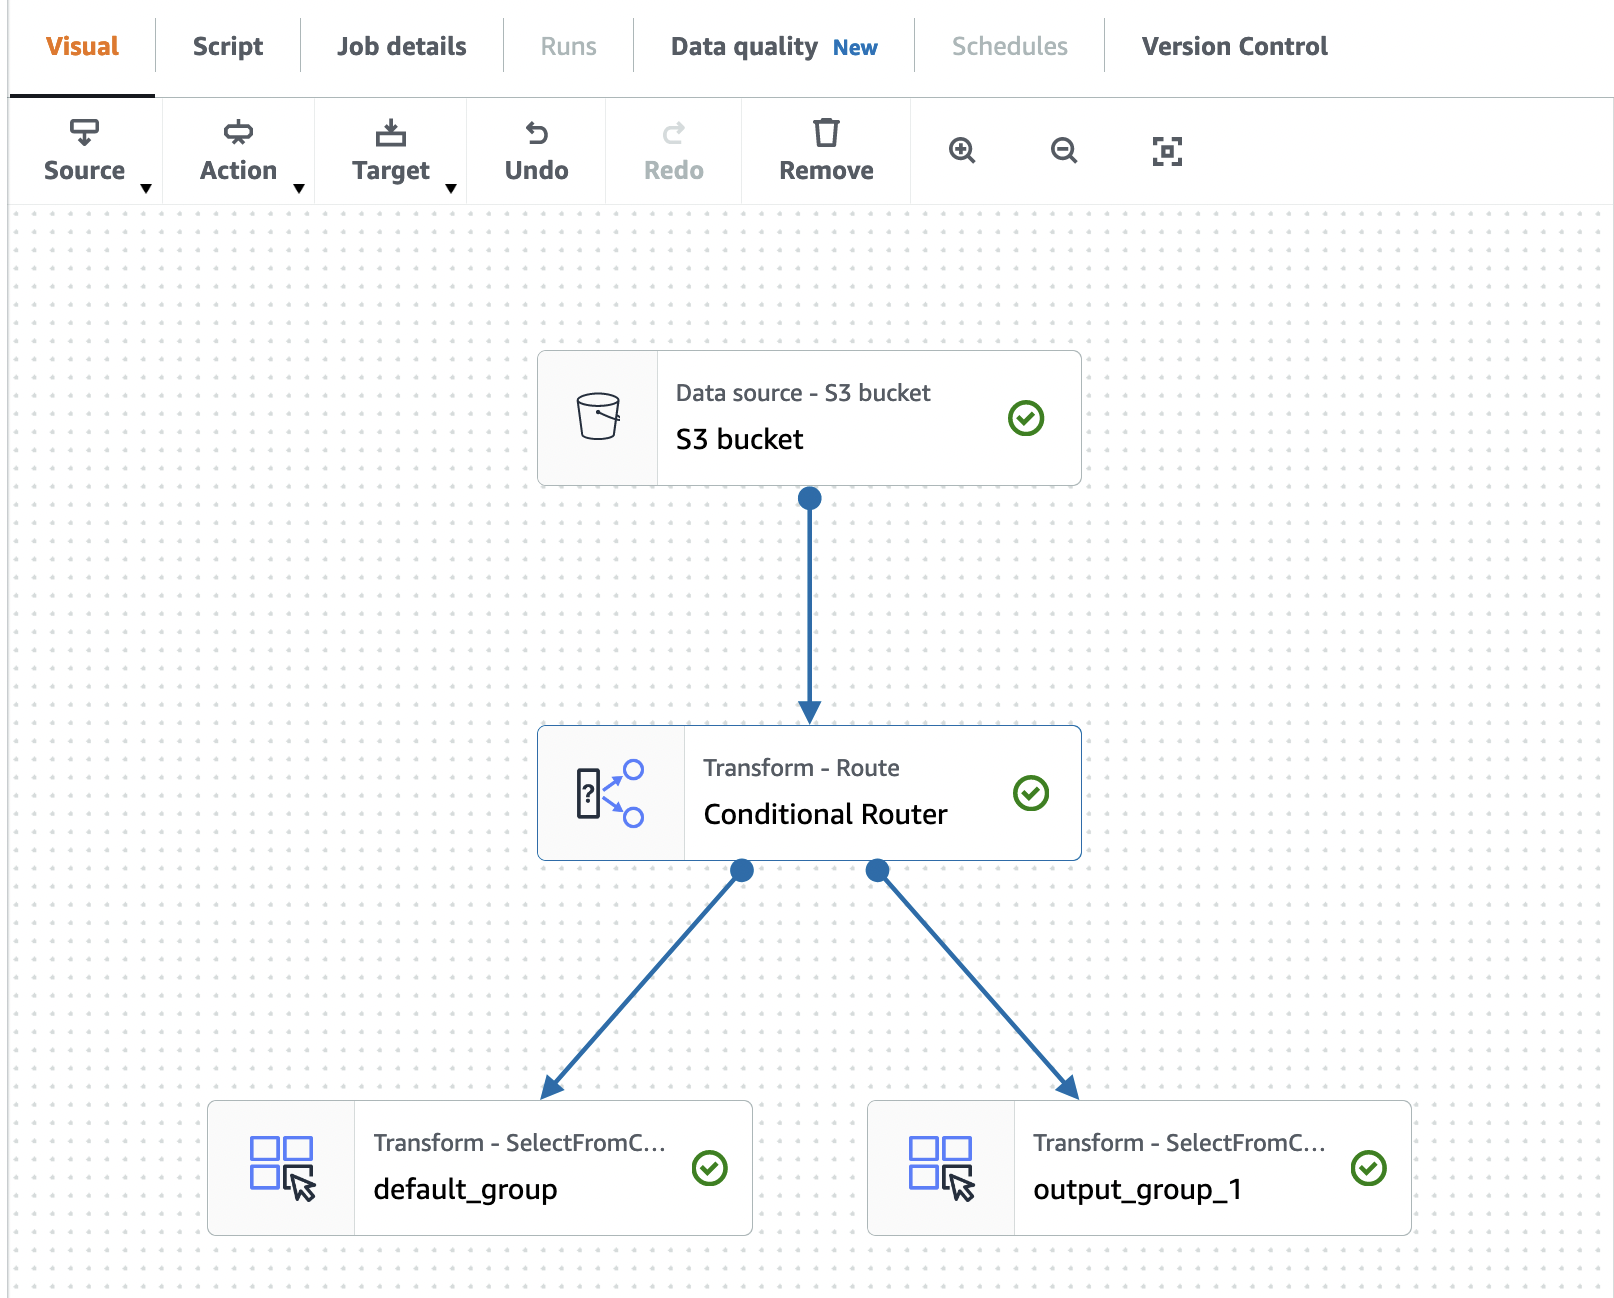 
              The screenshot shows the conditional router transform node connected to a source node. Output nodes
                are shown branching from the conditional router node.
            